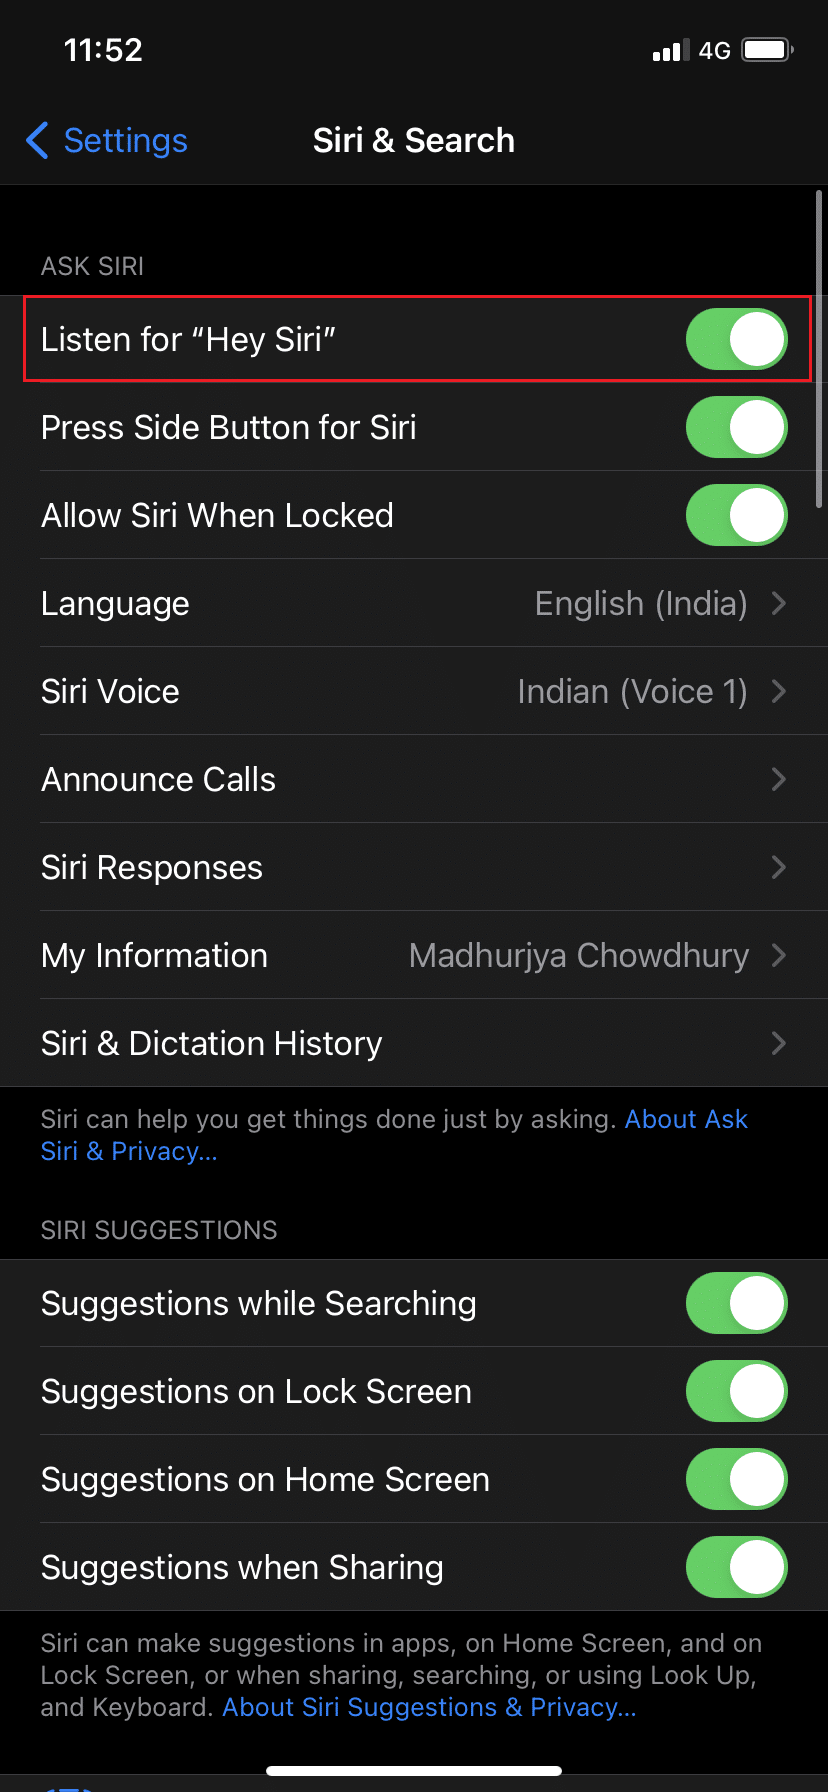 The option Listen for “Hey Siri” must be turned on